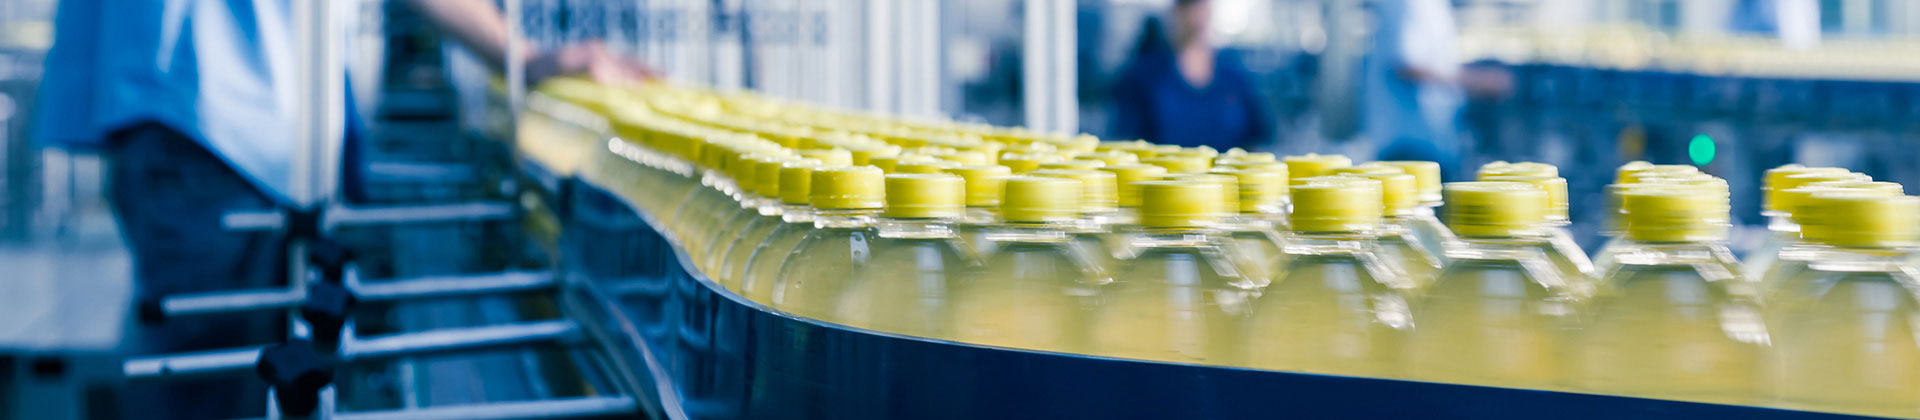 Bottles in a factory assembly line.